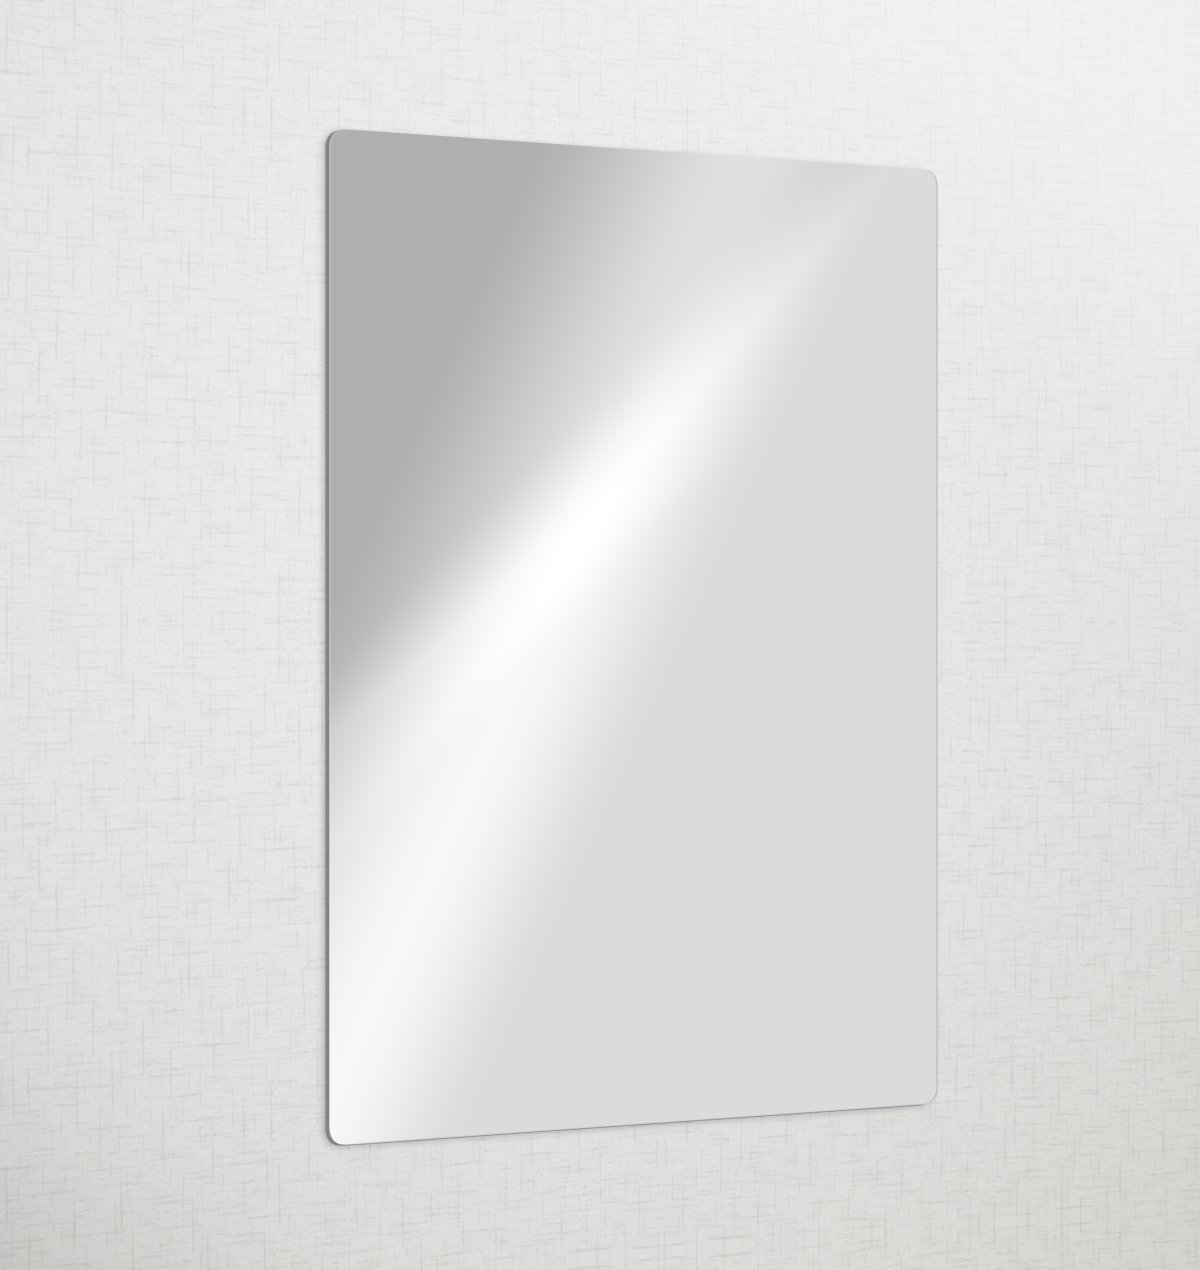 High-Quality Acrylic Mirrors – Clarke's Safety Mirrors